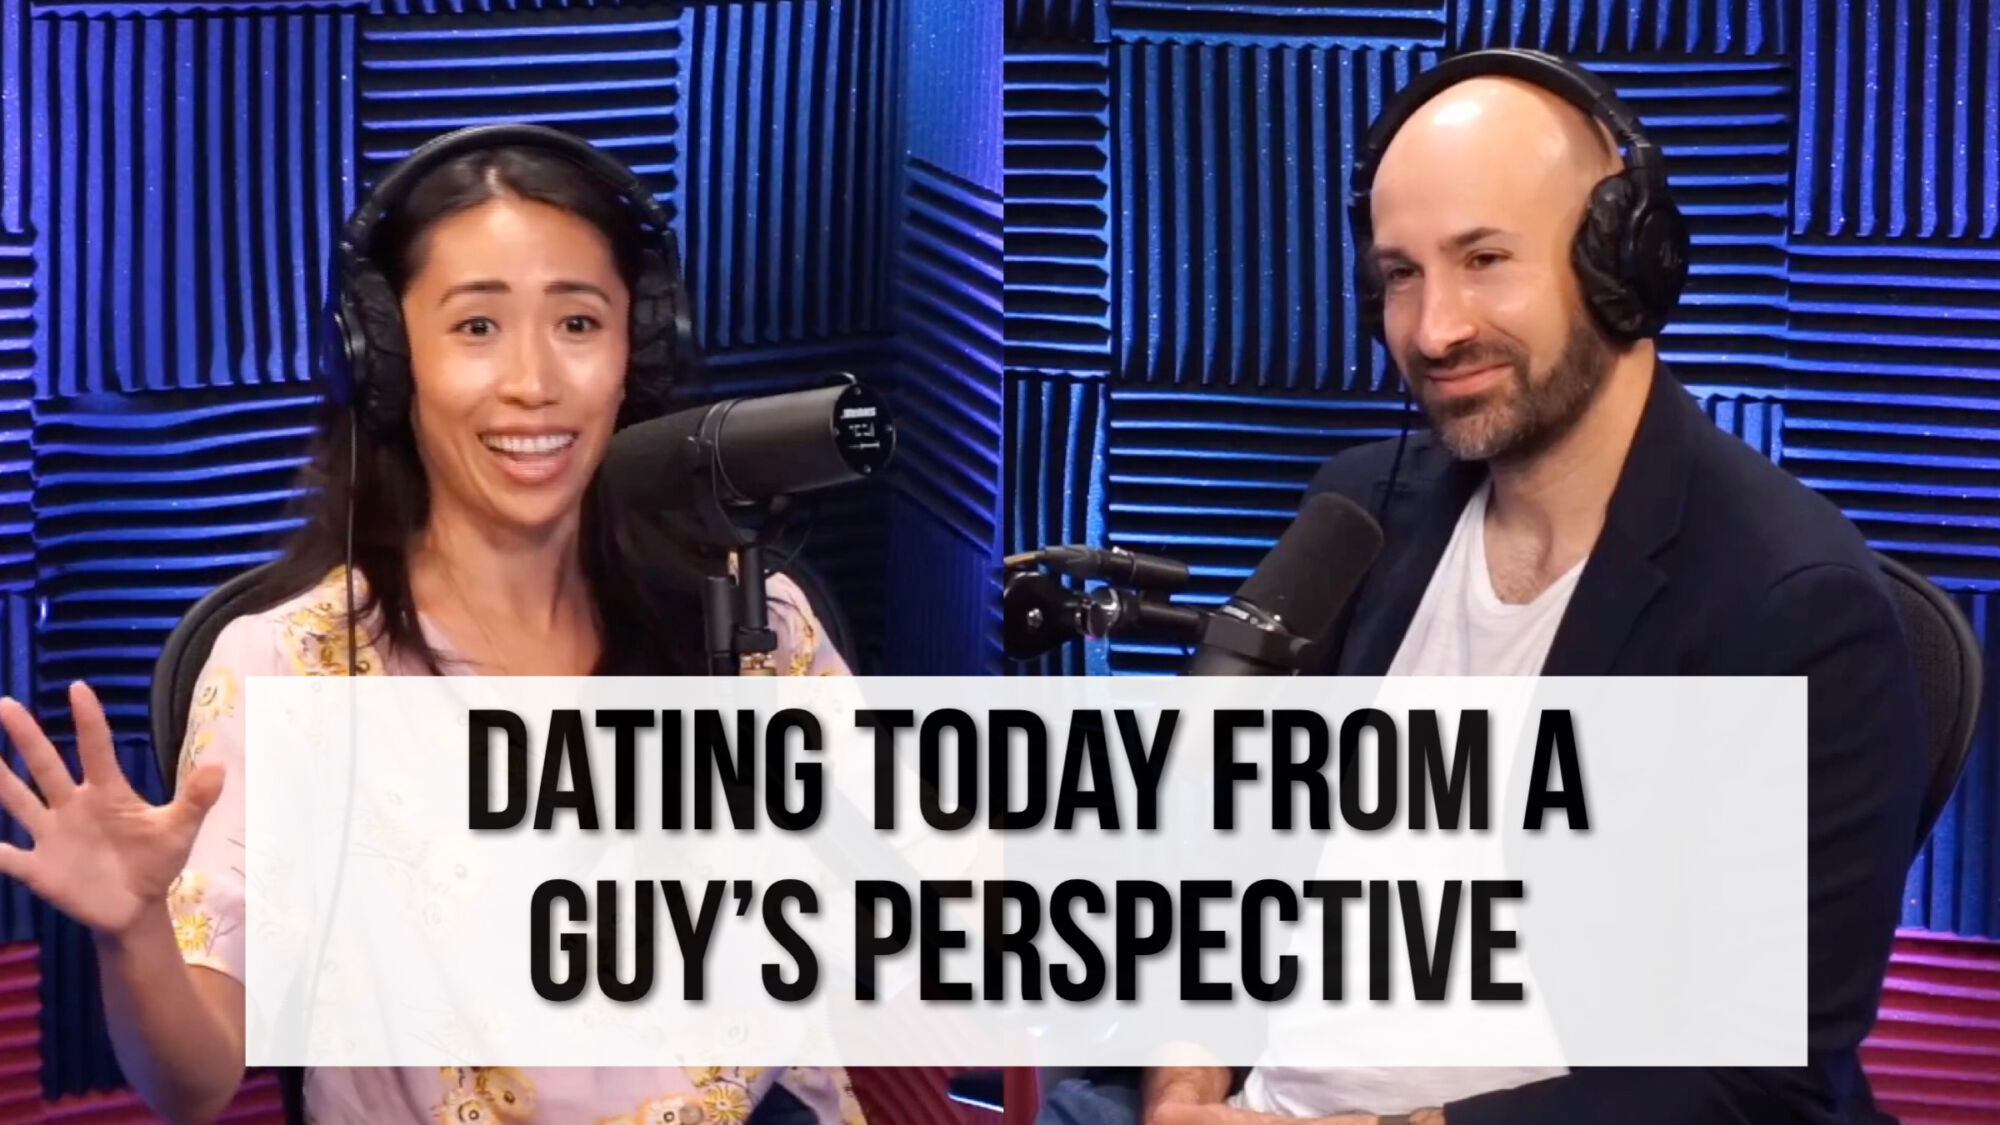 Dating From A Guy's Perspective. The Show Up With Christine Chang Podcast.